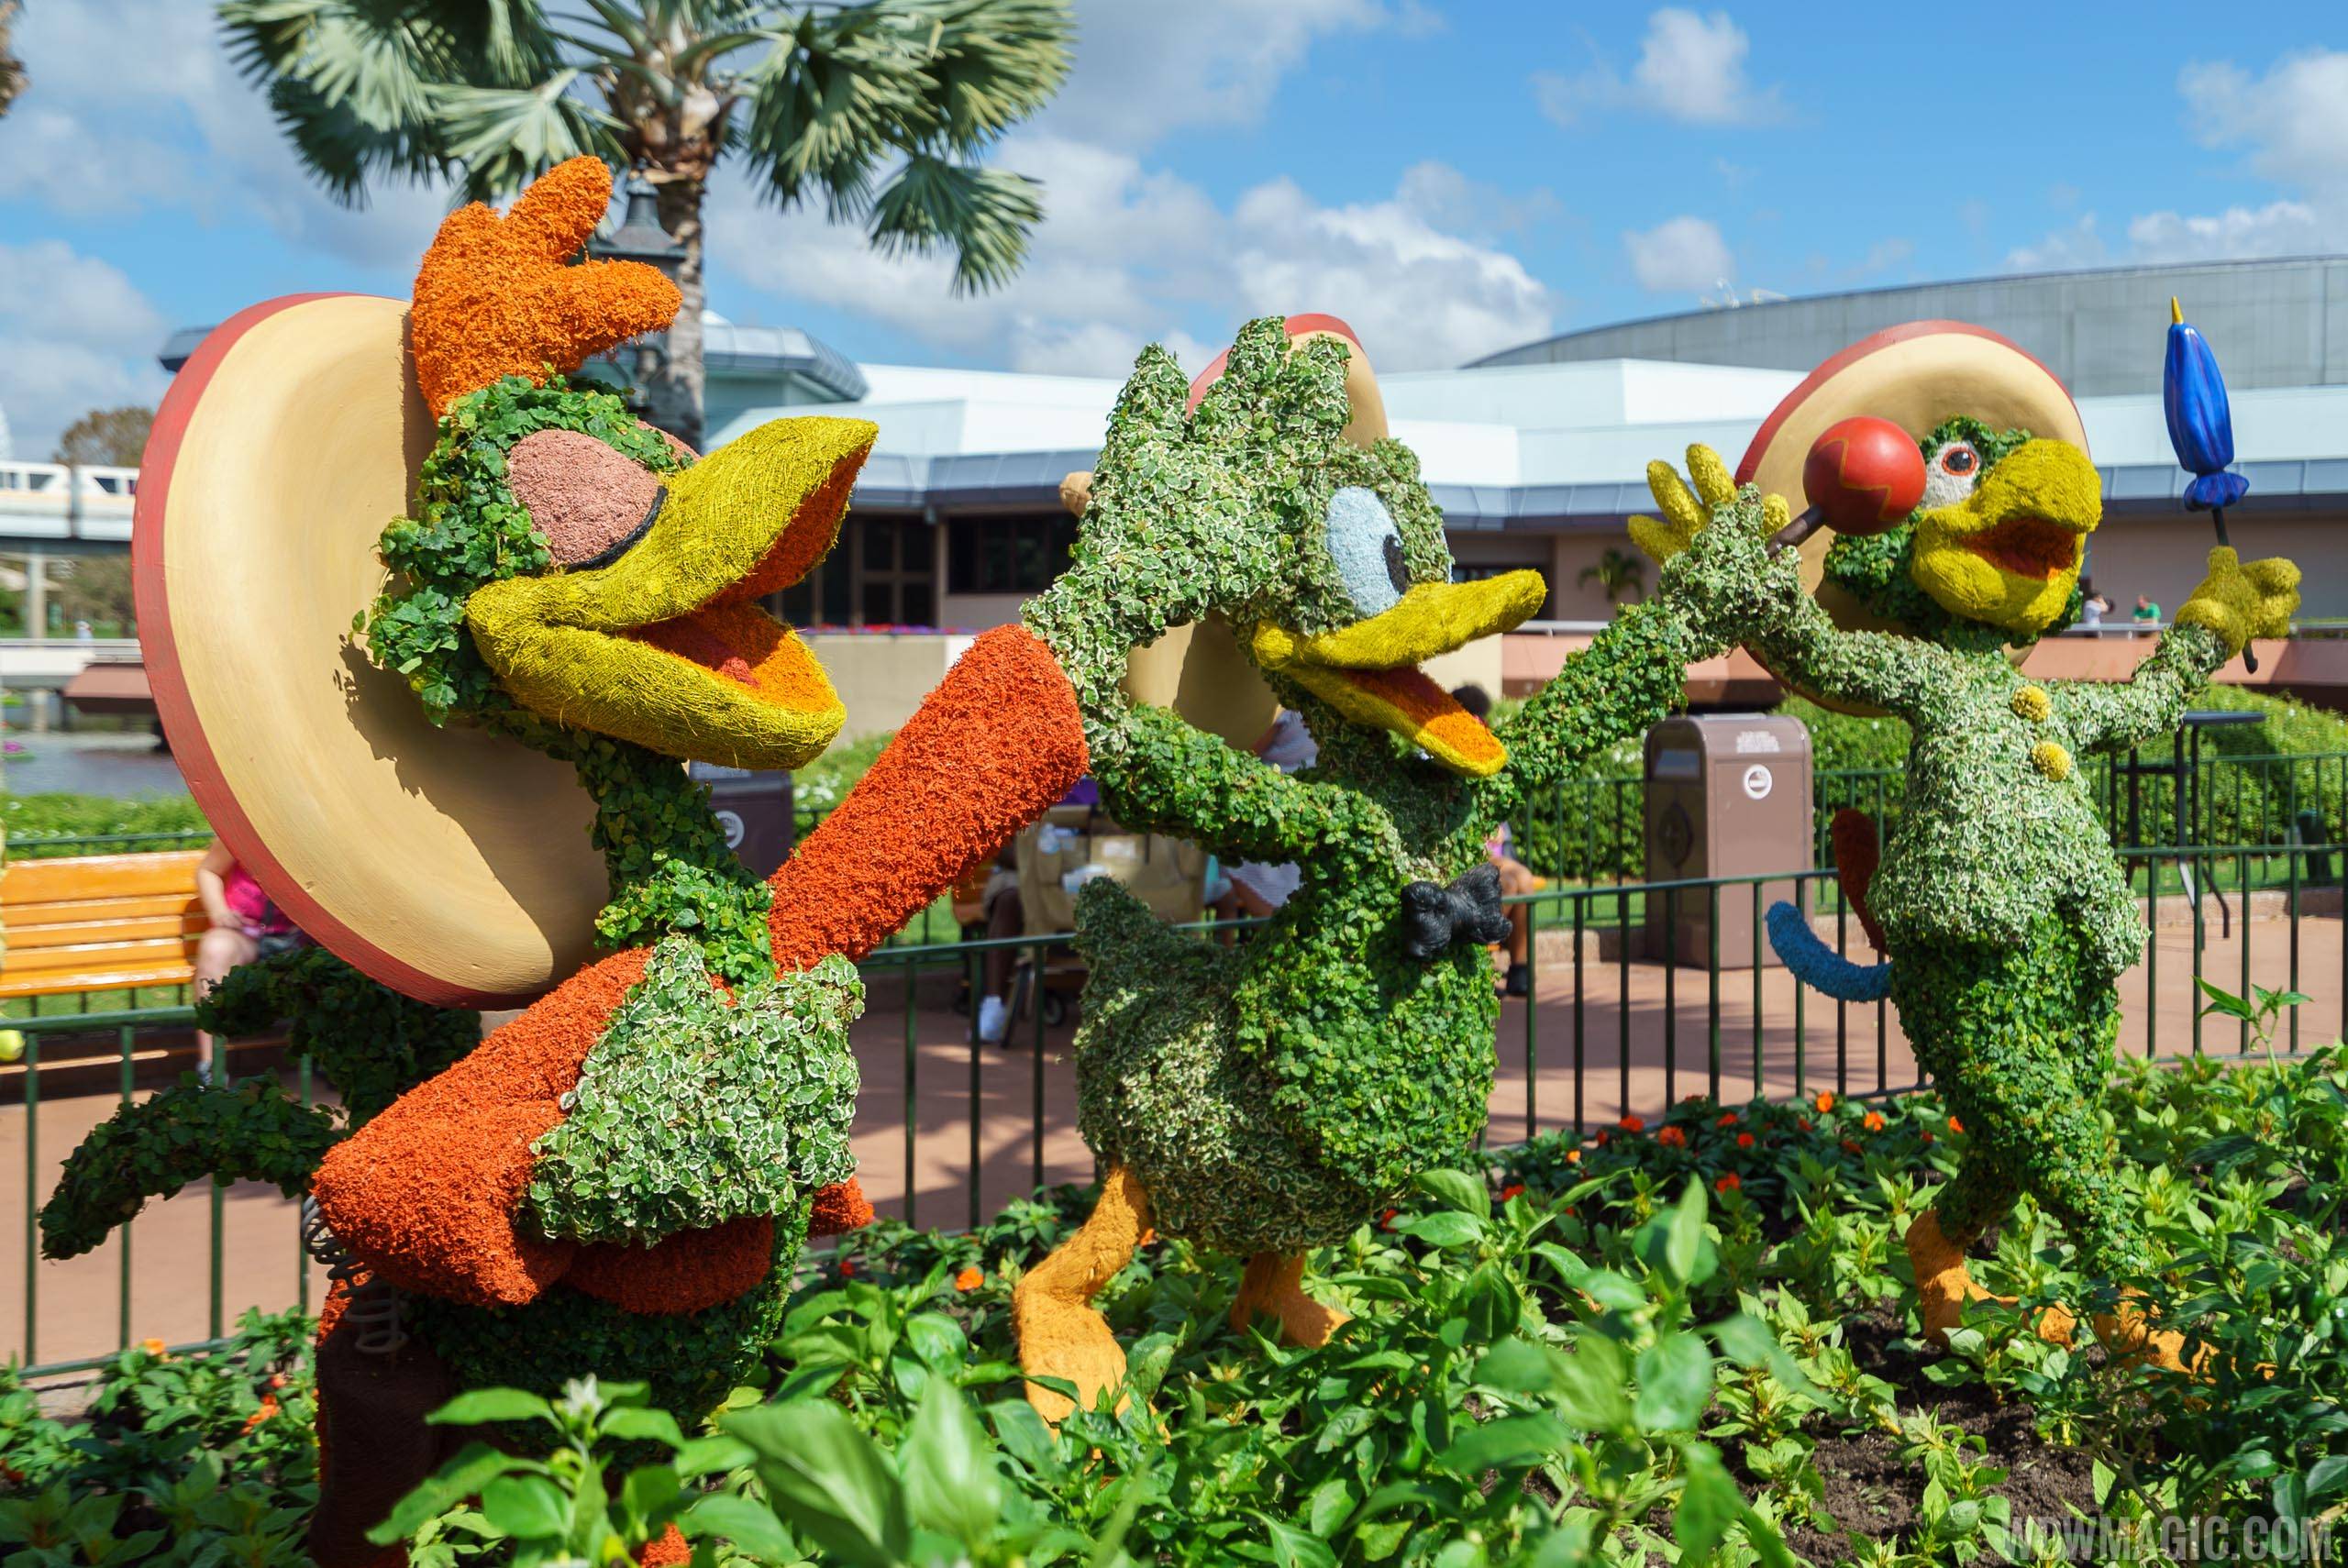 2017 Flower and Garden Festival - The Three Caballeros topiaries at the Mexico Pavilion